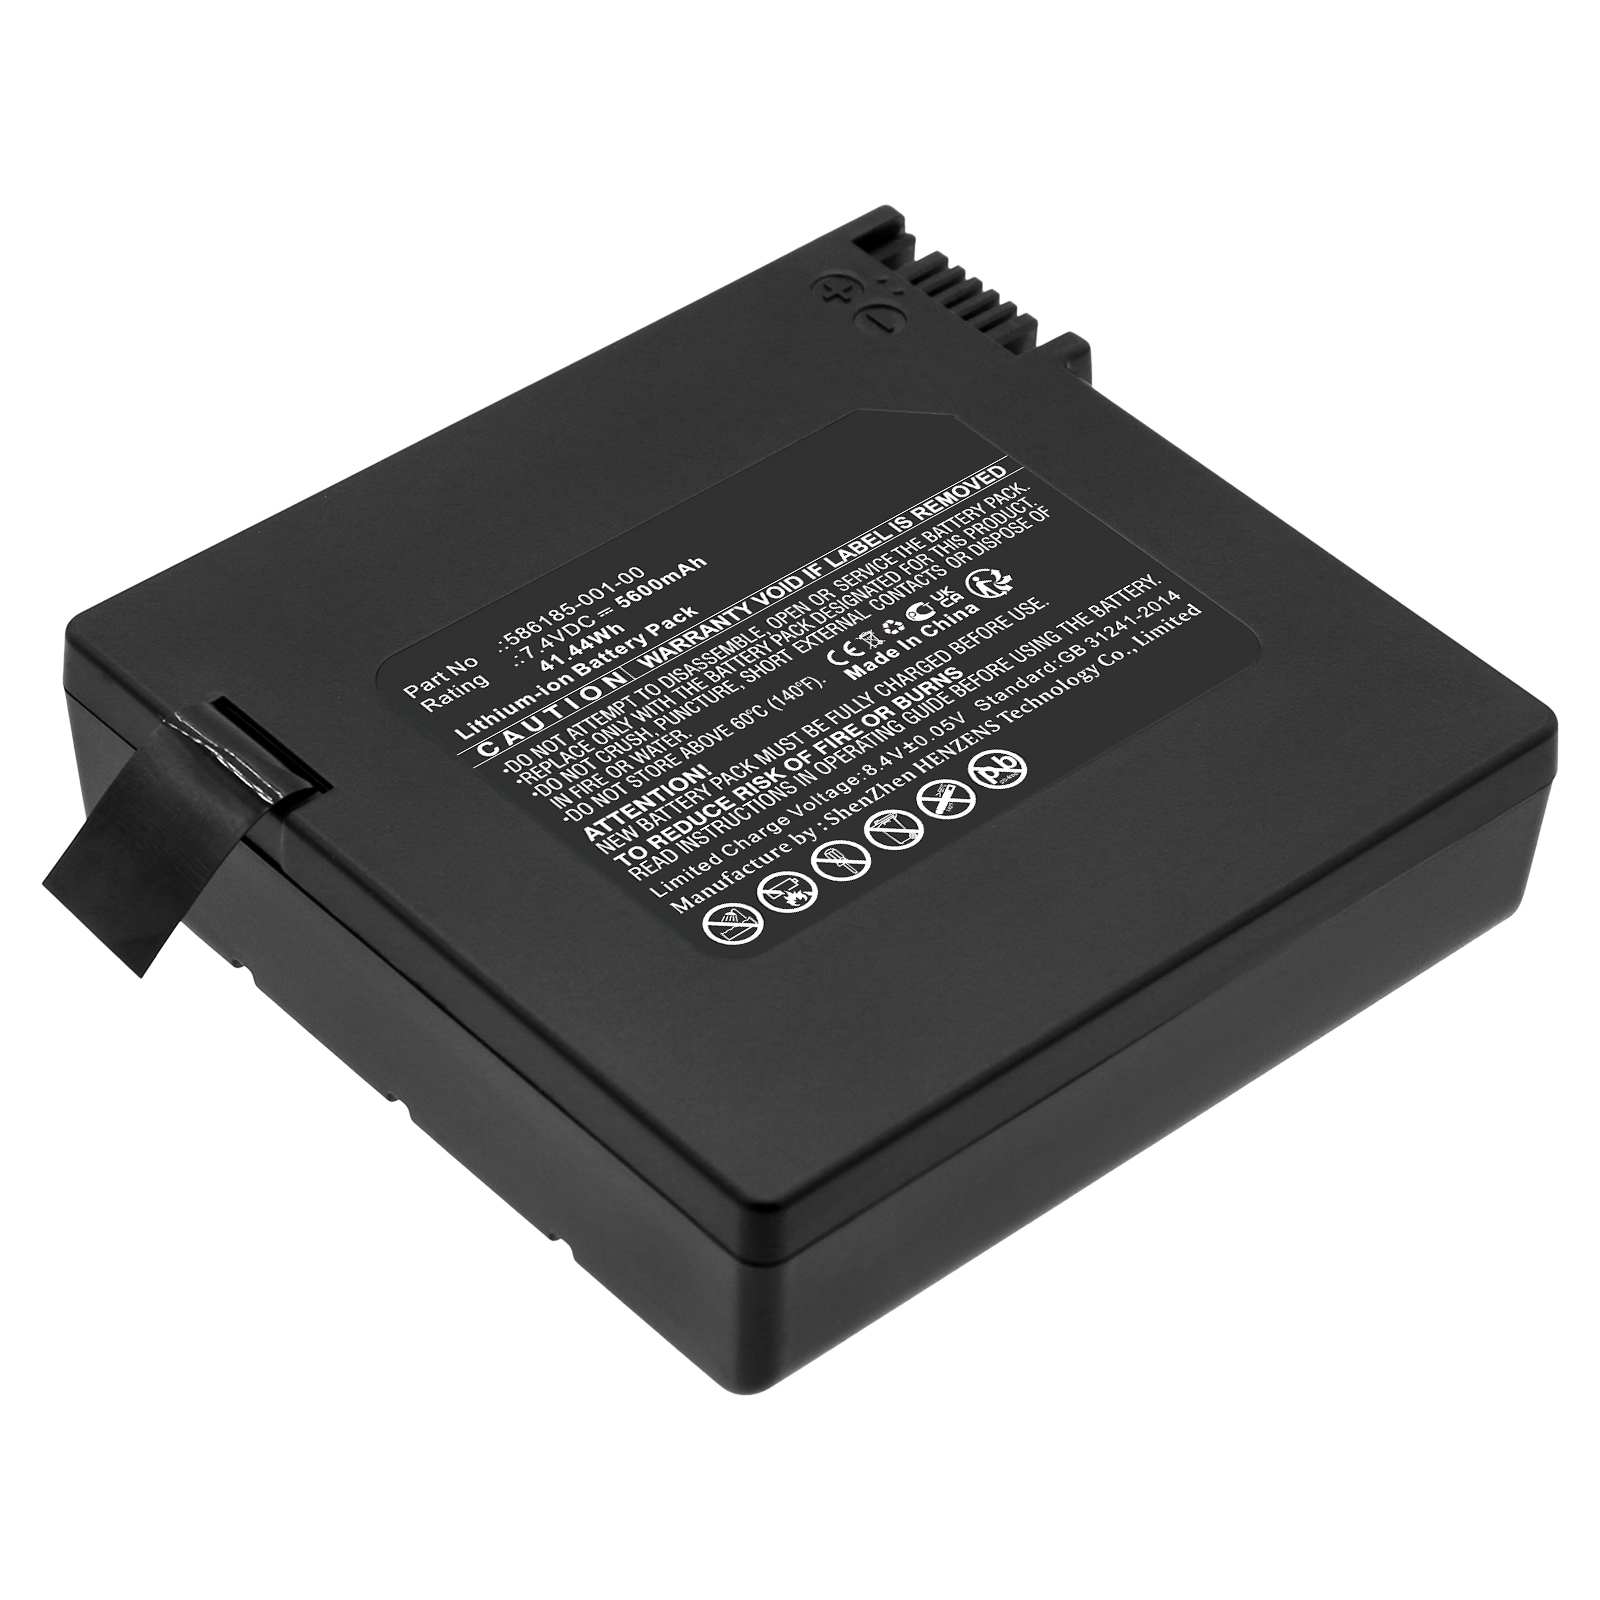 Batteries for AT&TCable Modem